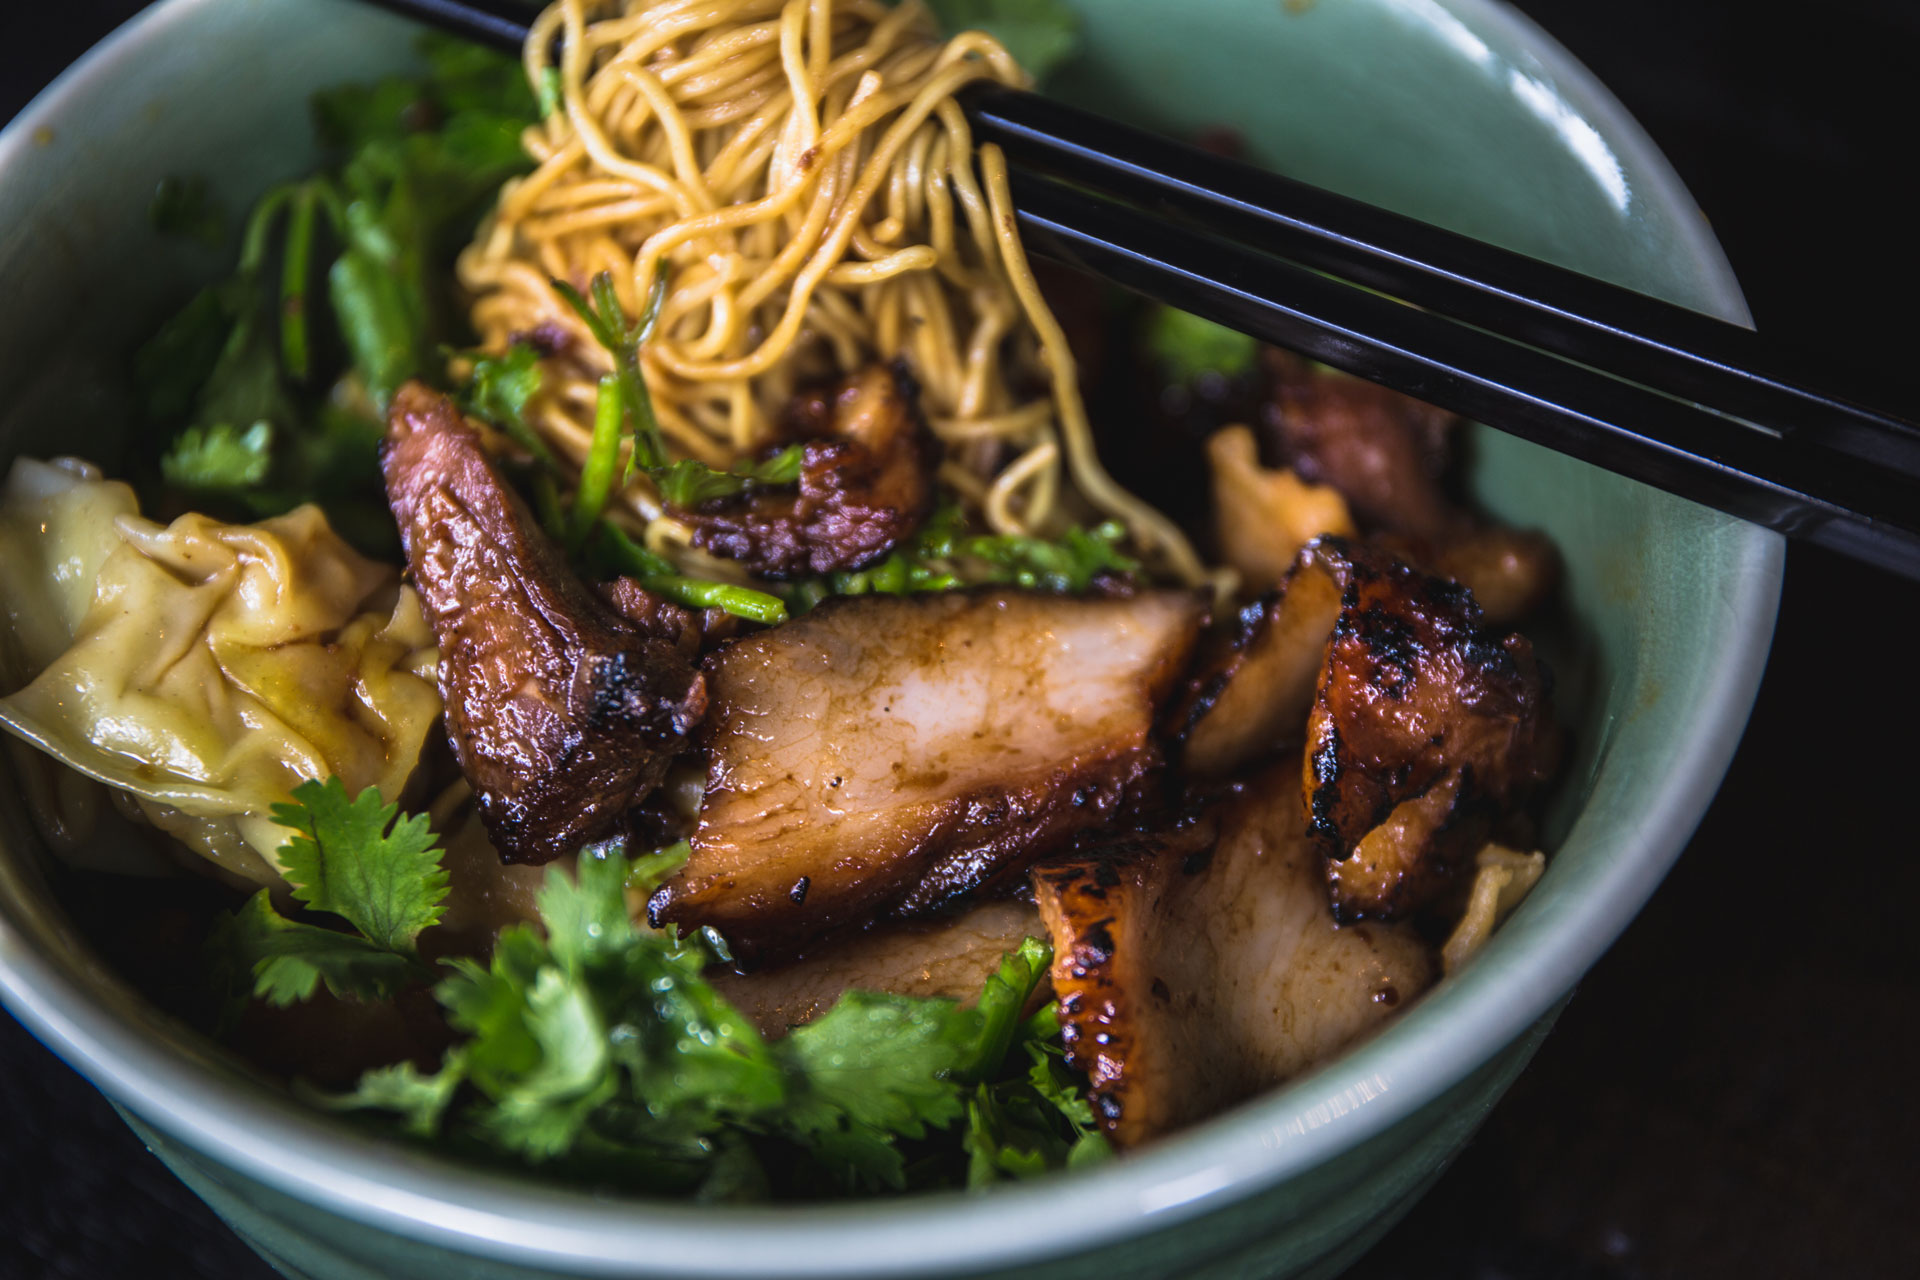 Taking roast pork noodles to new heights